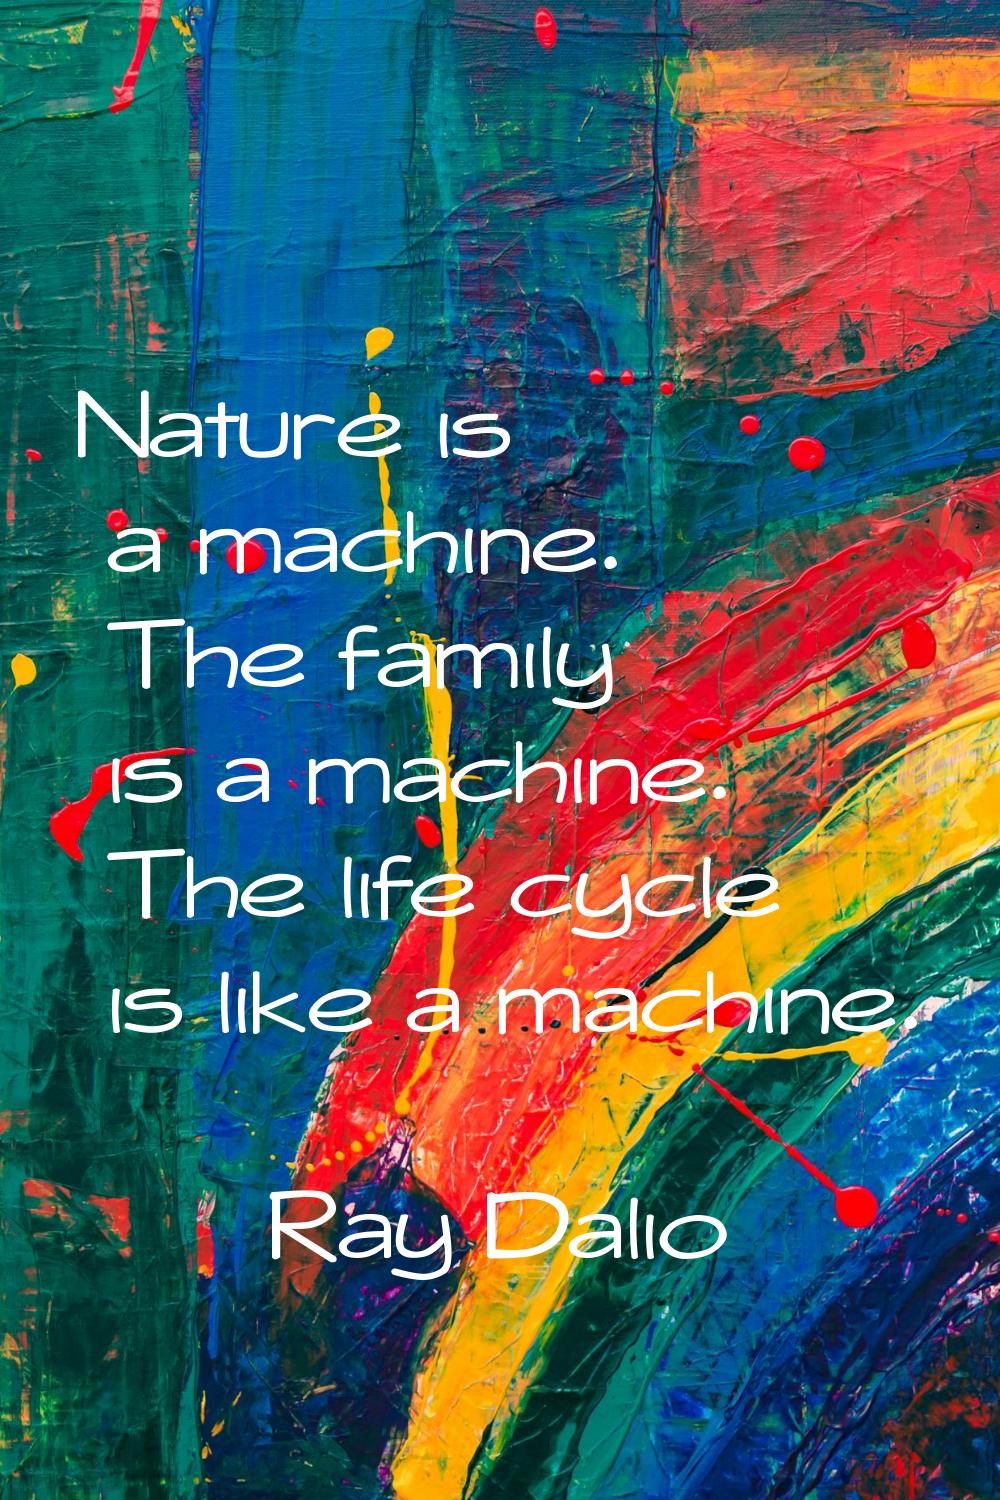 Nature is a machine. The family is a machine. The life cycle is like a machine.